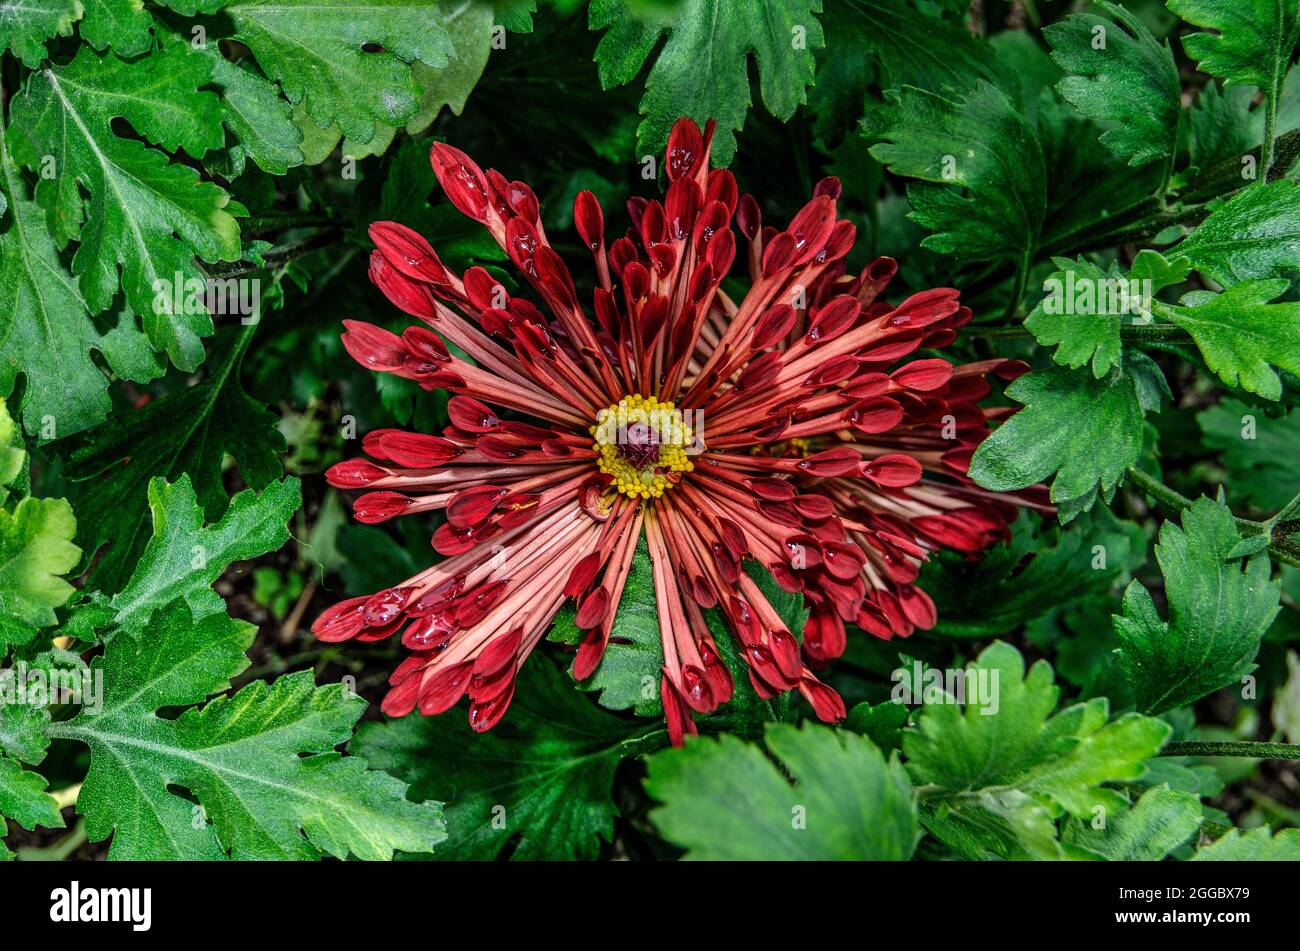 Chrysanthemum Korean needle with spoon-shaped petals (Chrysanthemum koreanum). Cultivar with silver red flowers. One flower among foliage close up. Au Stock Photo